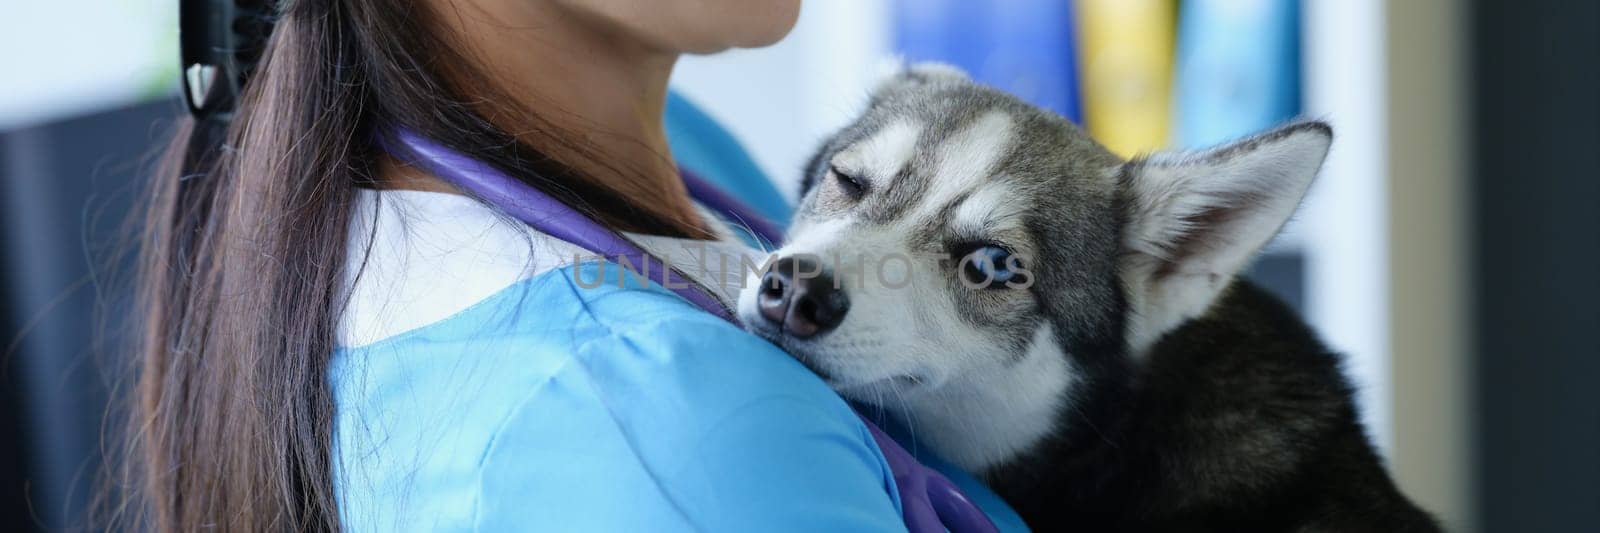 Veterinarian is holding small husky dog with eye problem by kuprevich